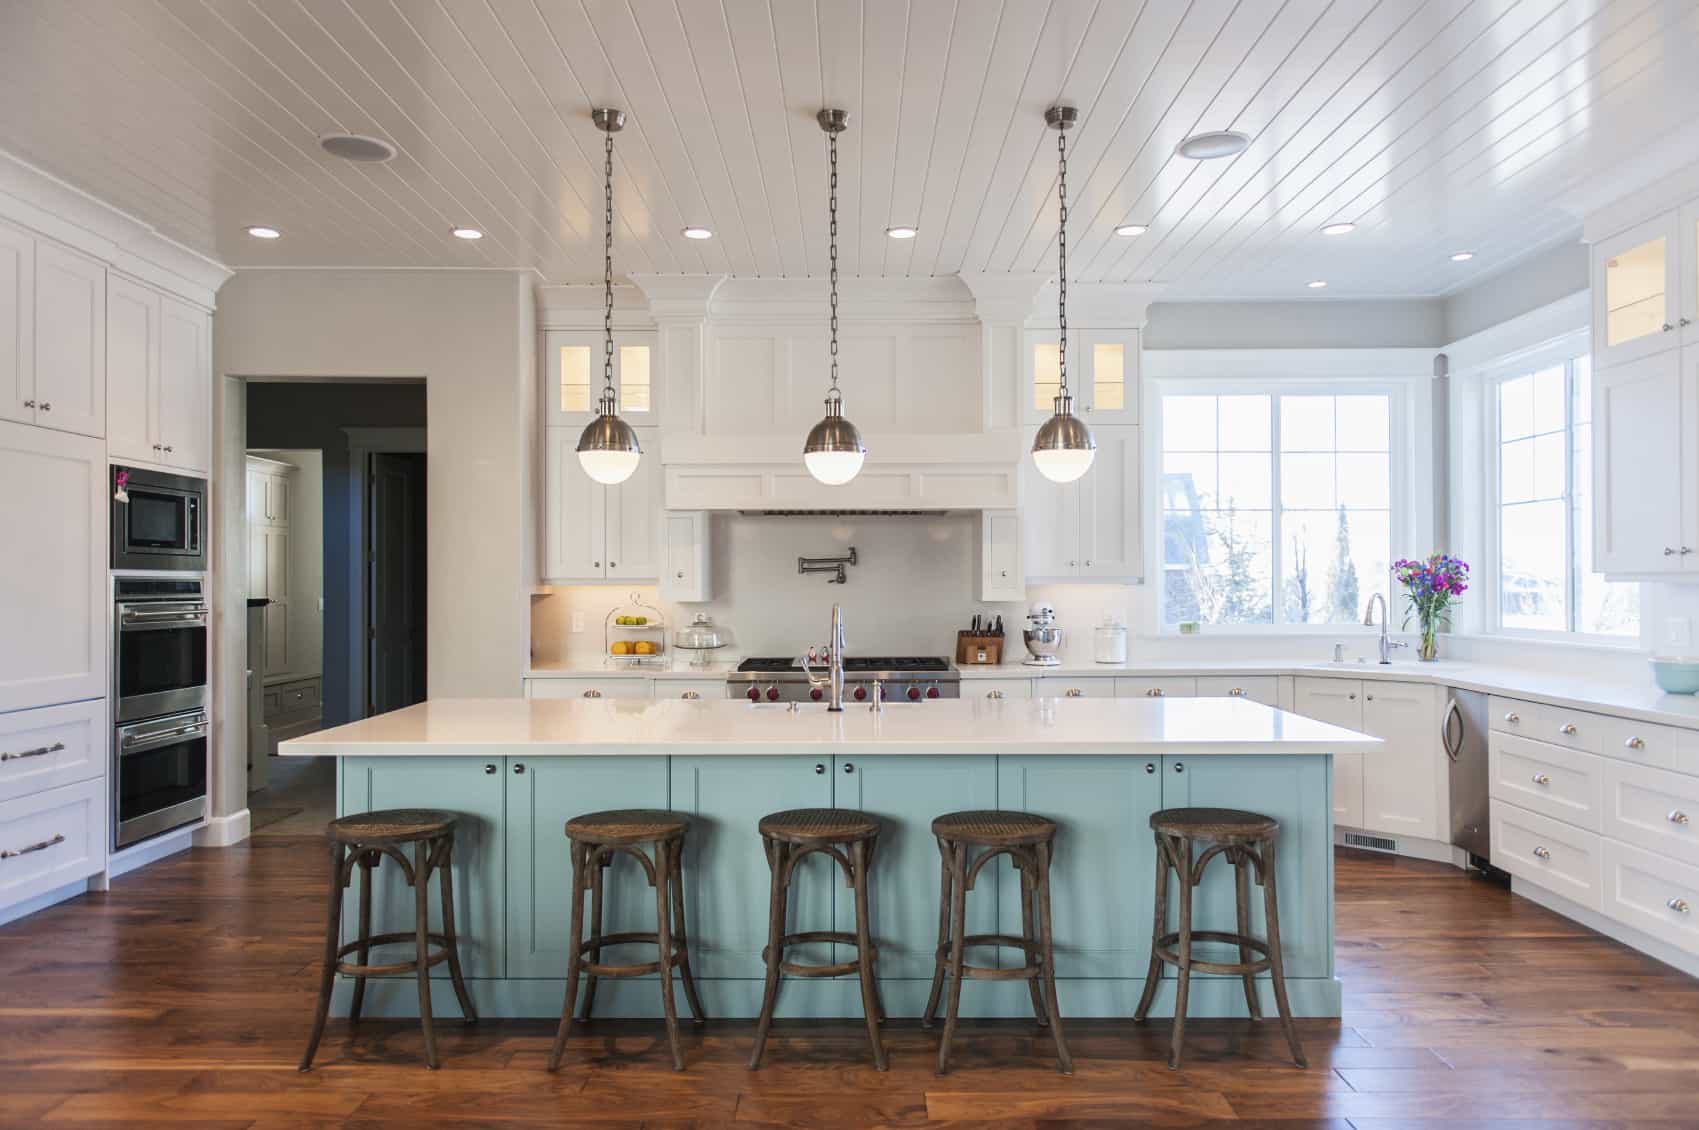 Bright contemporary kitchen featuring white and wooden color. The sky blue island is quite large with white marble countertops and low-hanging lights.